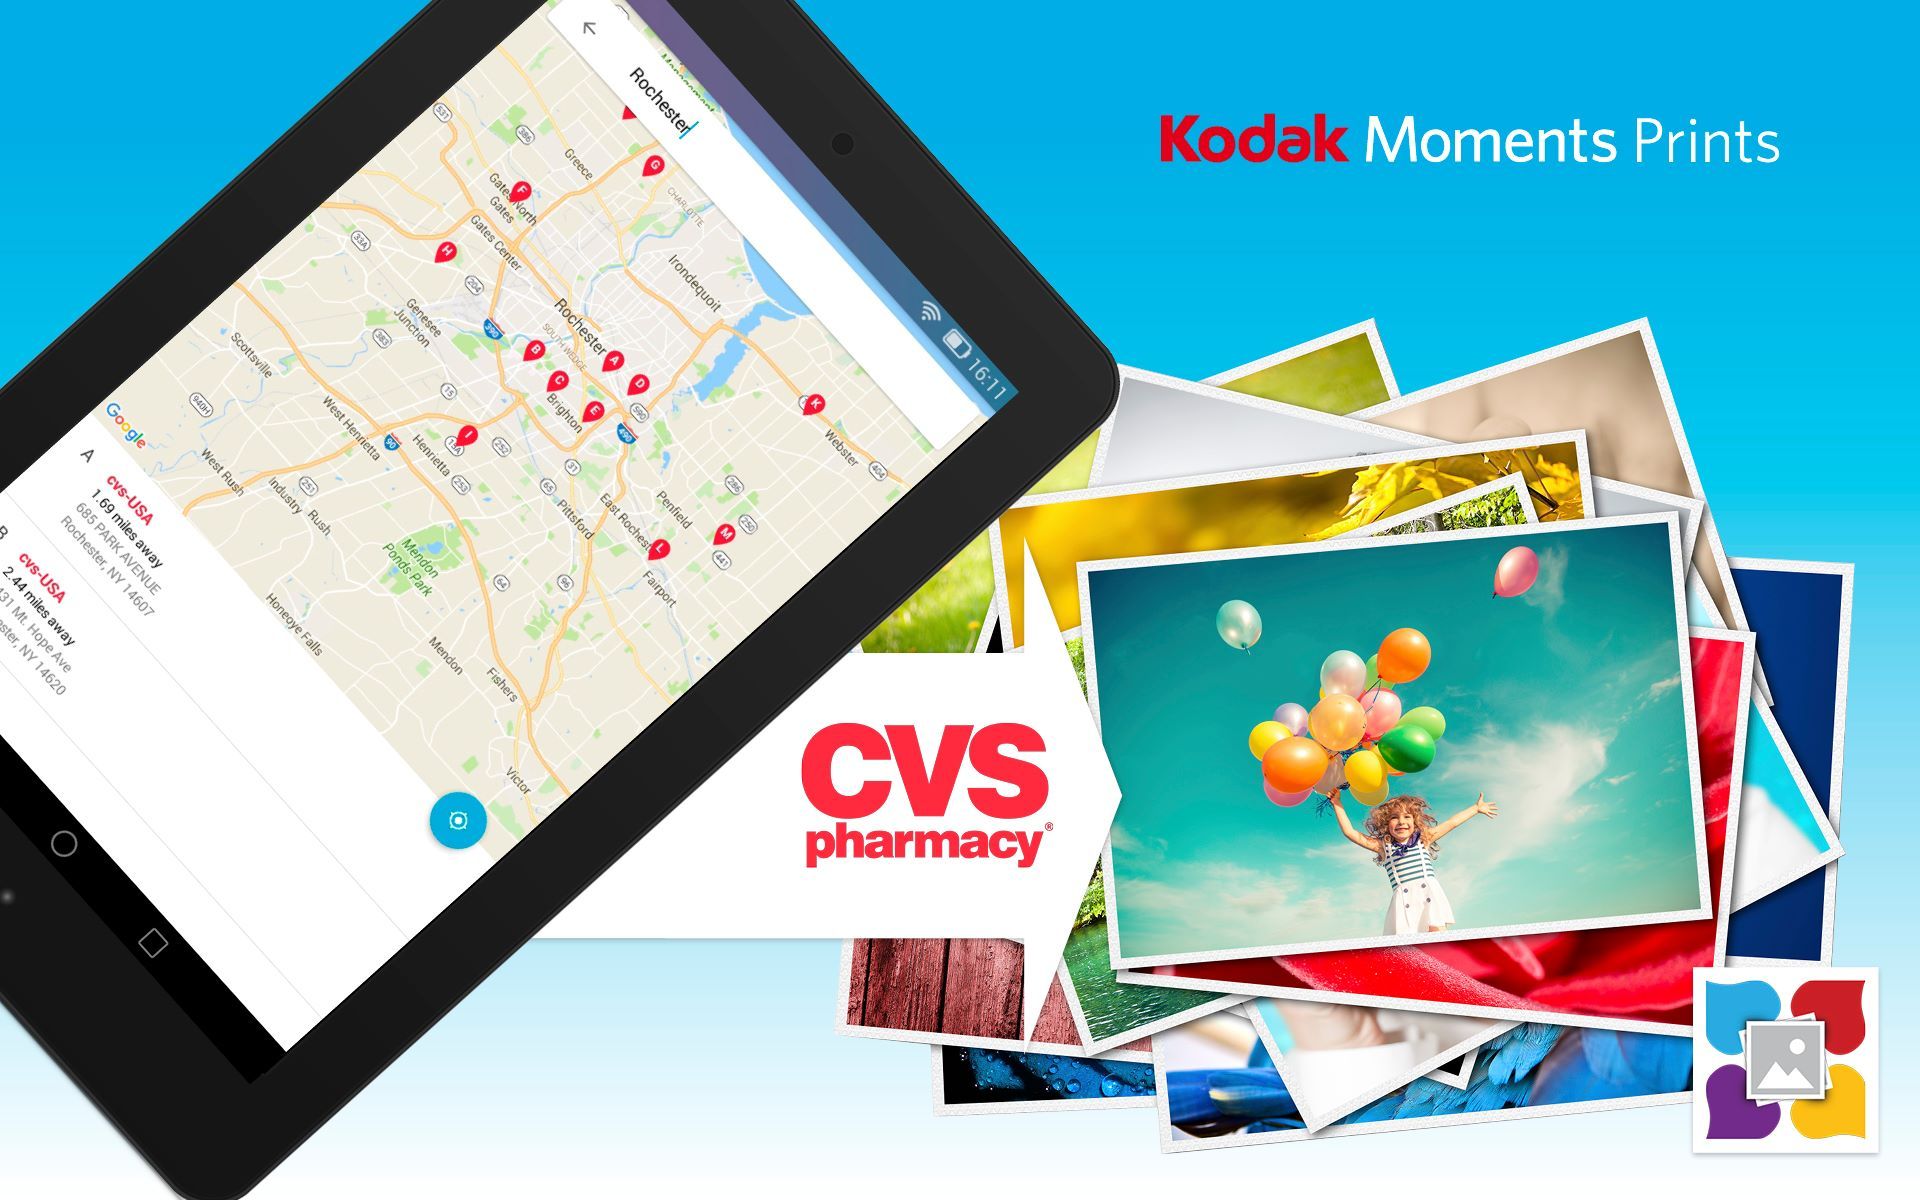 Photo Prints Now: CVS Photo Prints From Your Kindle, Fire Tablet & Phone